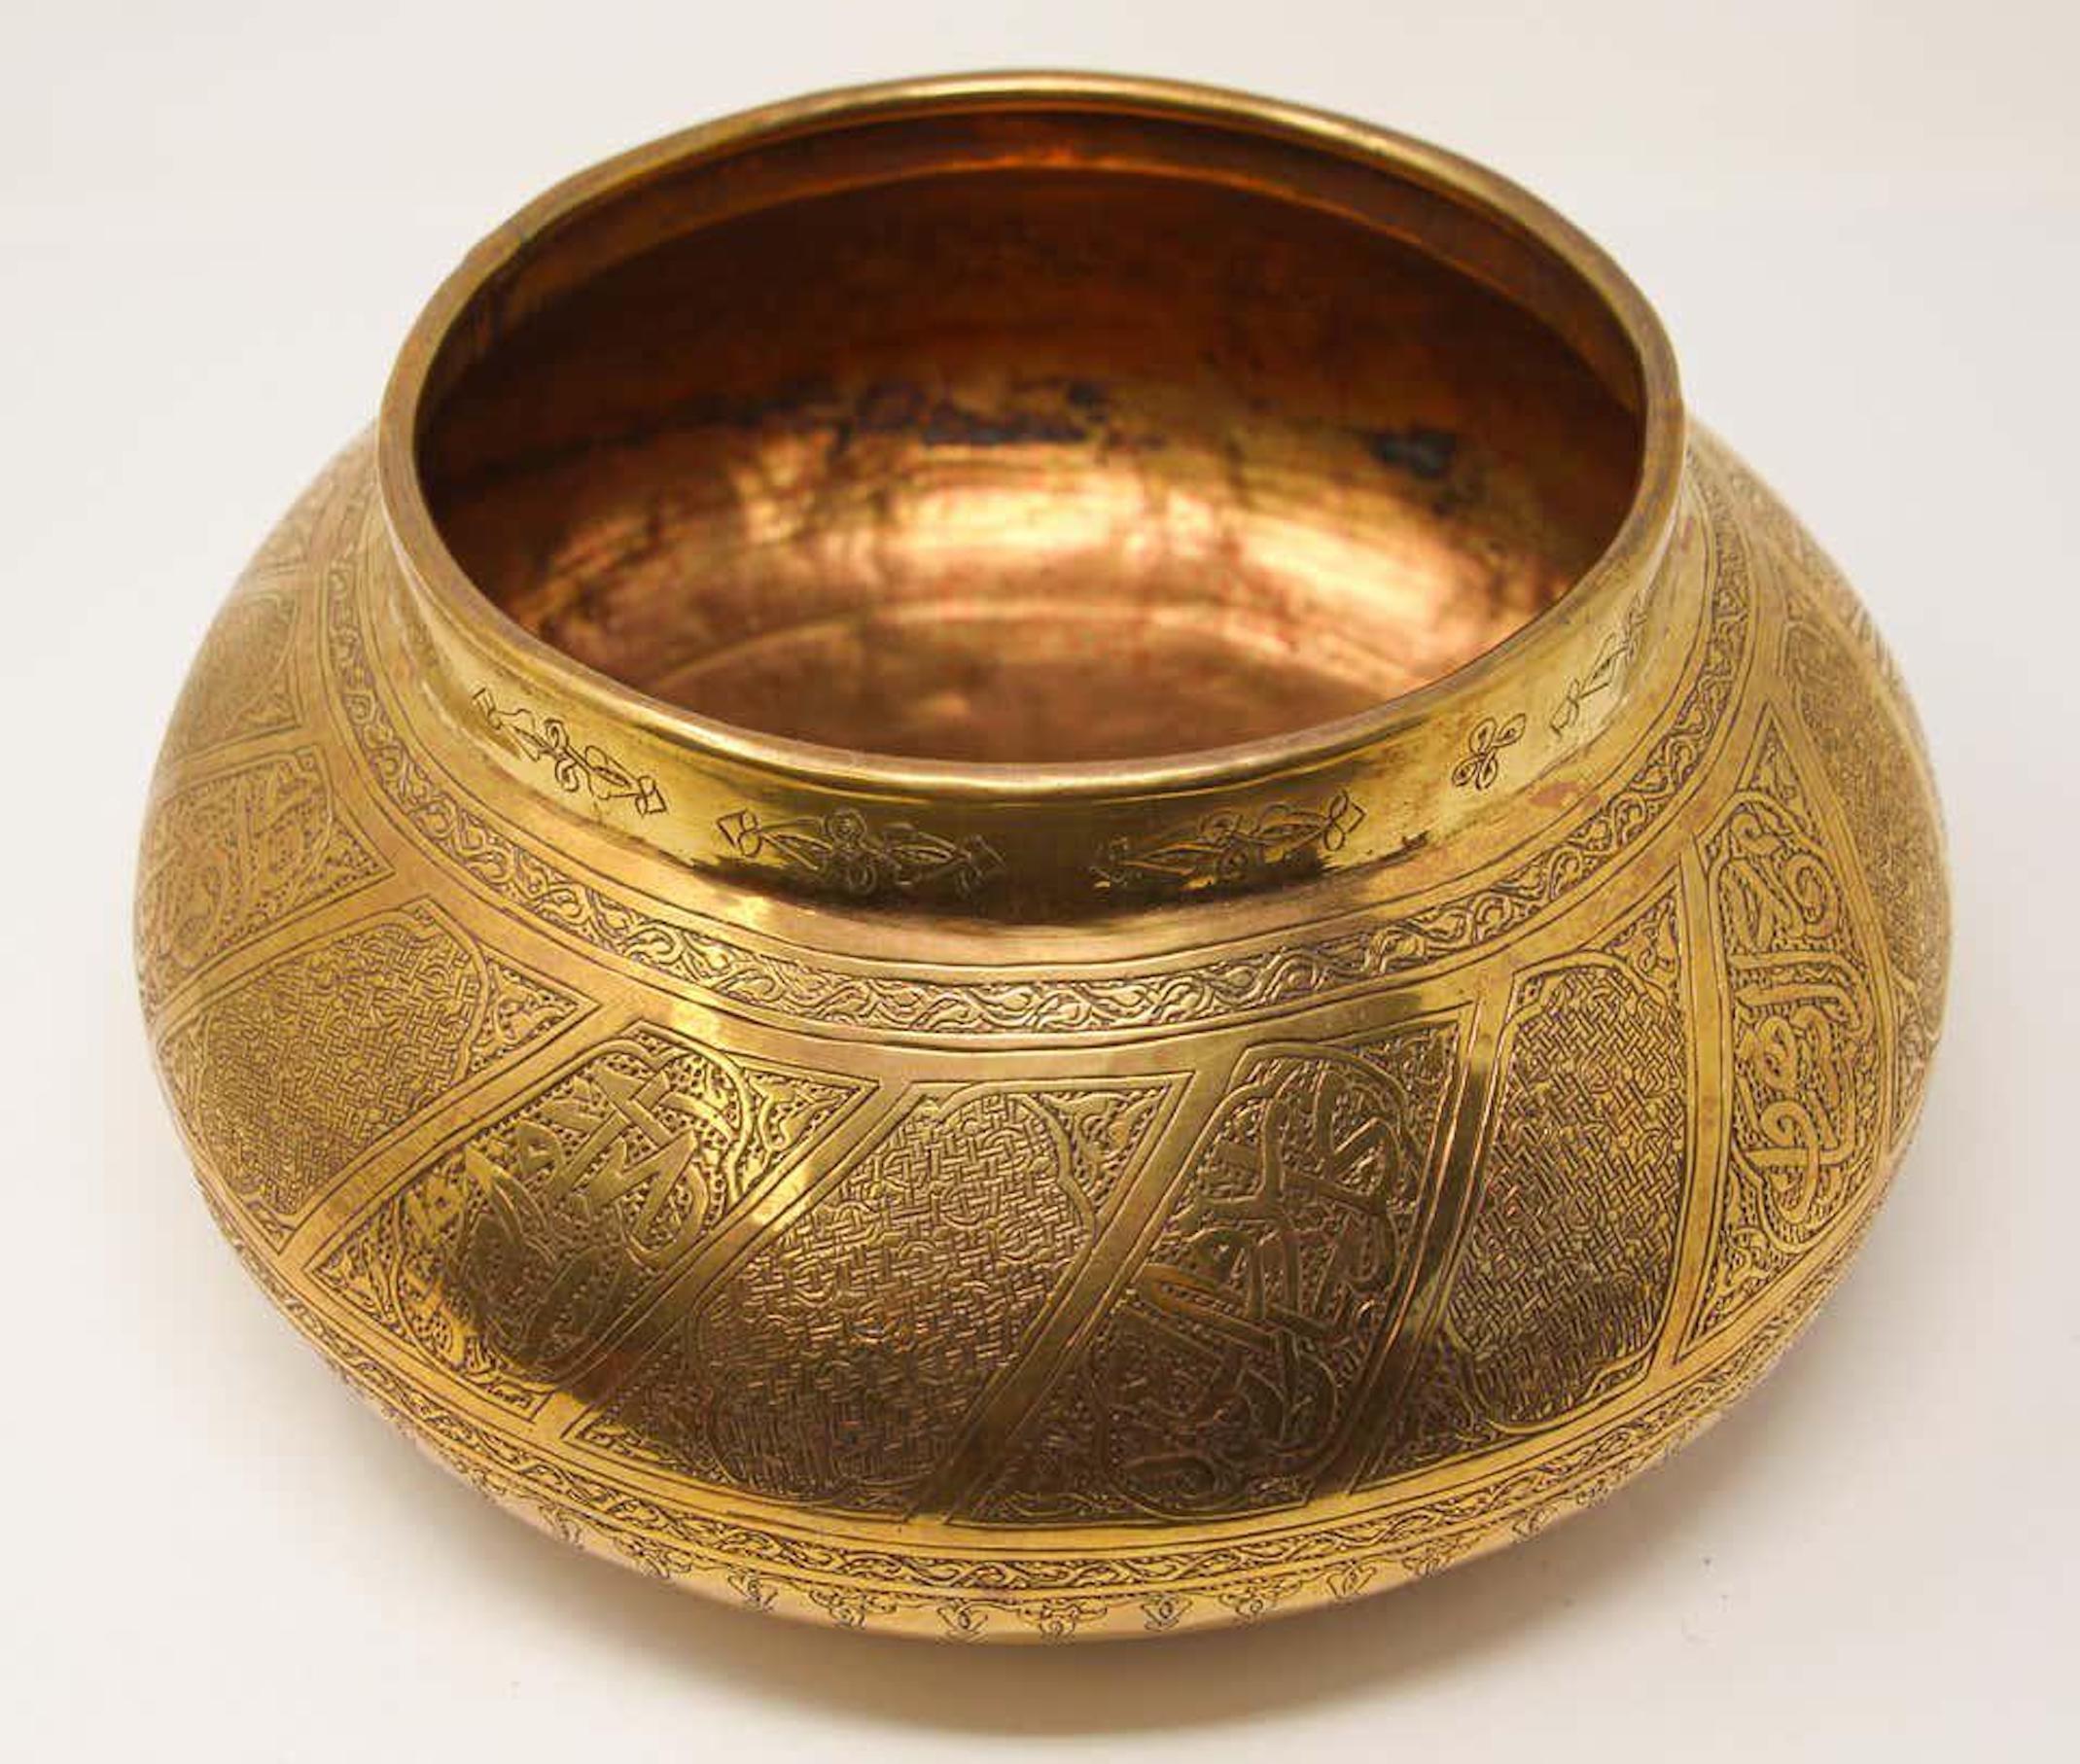 Large antique 19th century Moorish brass bowl engraved with Thuluth callighraphy writting.
Profusely hand chased with vines and vegetal motifs and inscribed with Islamic verses of the Holly Coran.
This Asian brass metal bowl has been